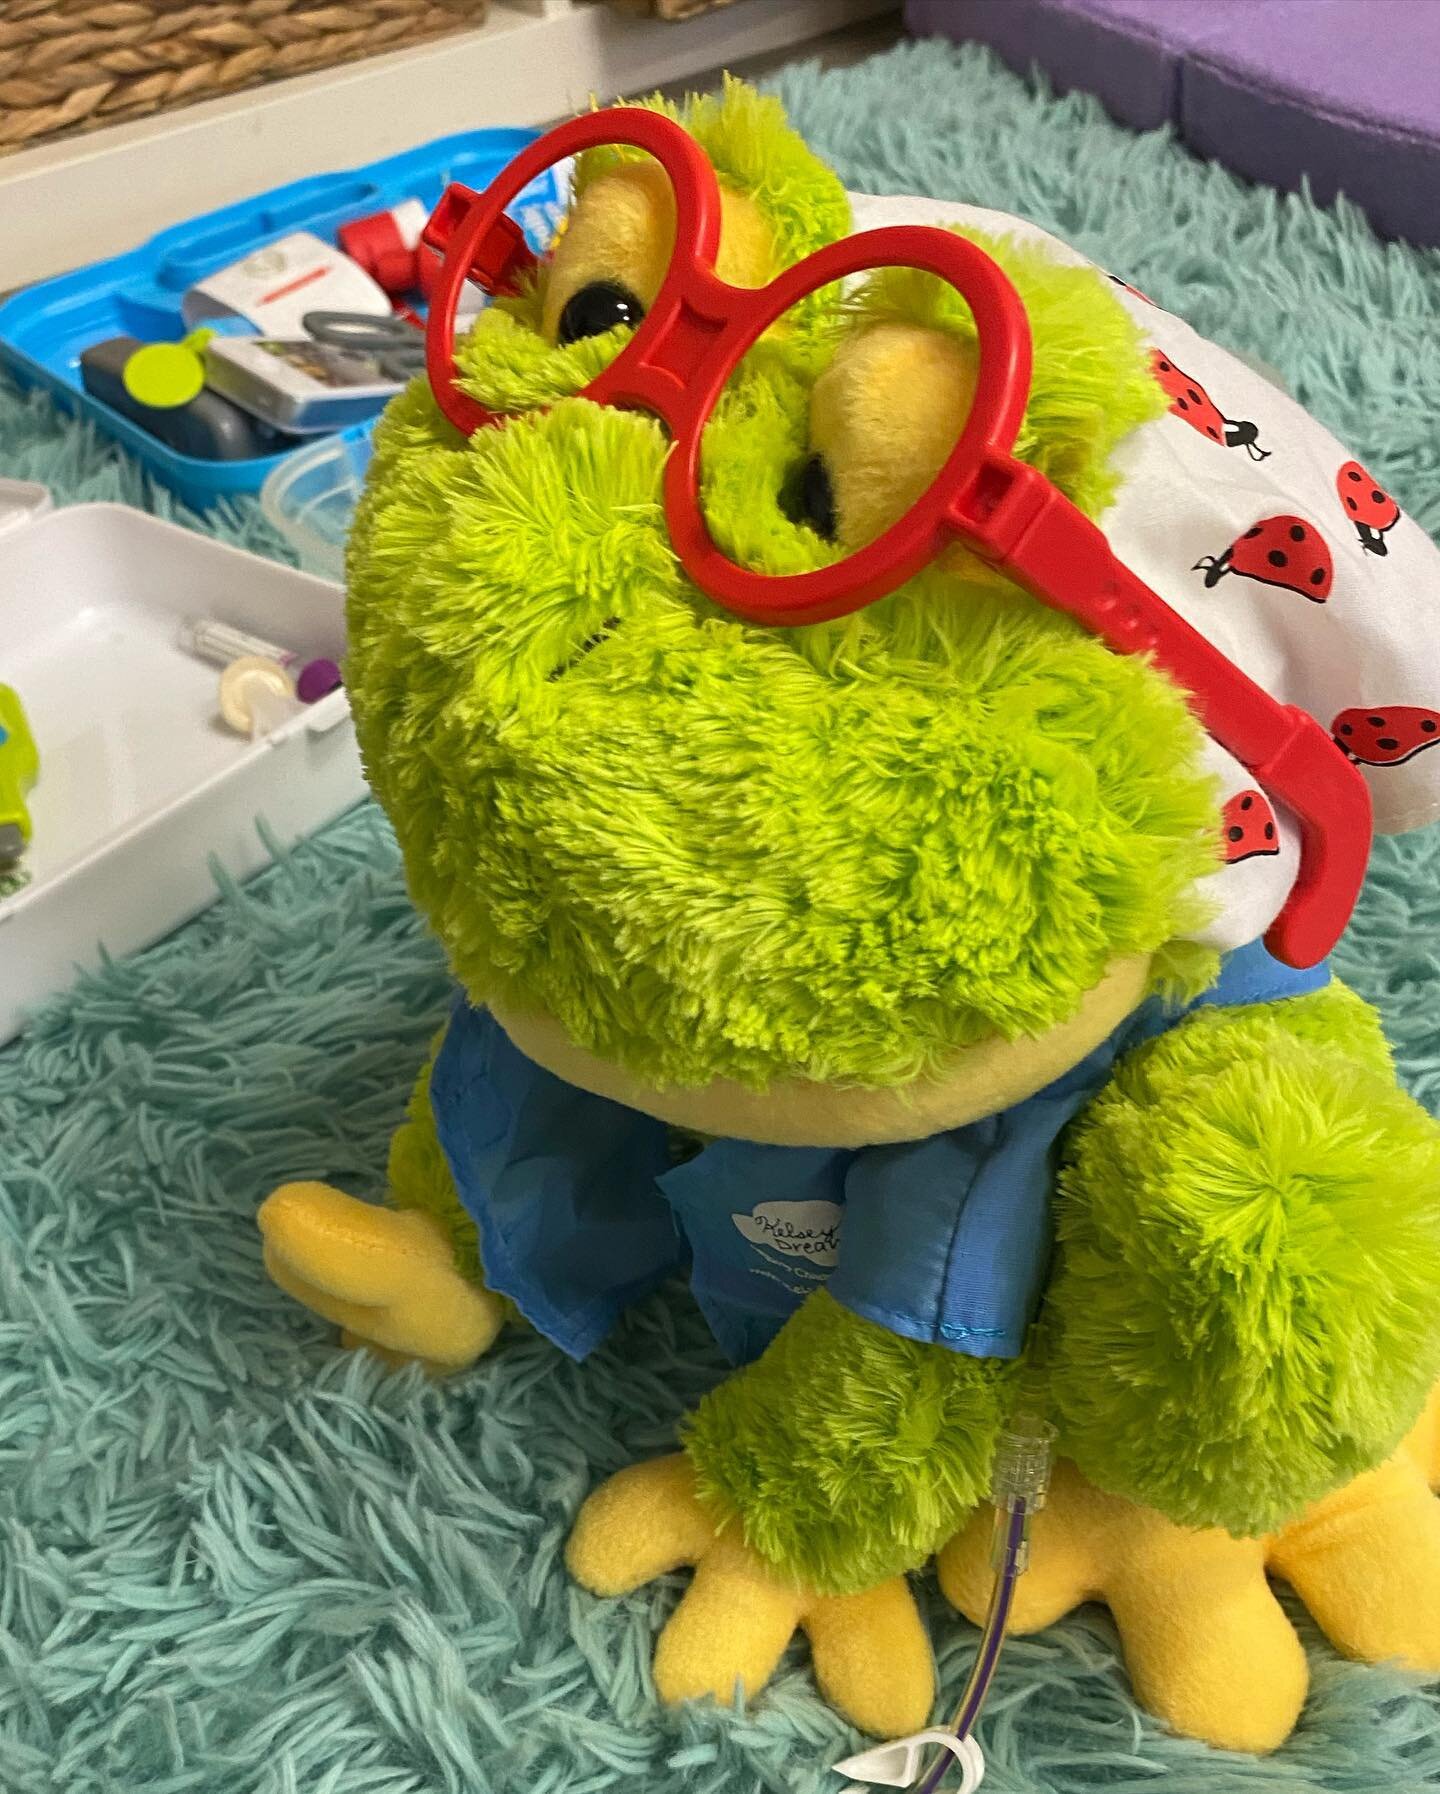 Today Hopper the frog 🐸 had quite the check up&hellip; needed glasses, a patch, sleepy medicine, an IV&hellip; and a hand to hold. #medicalplay #Hopper